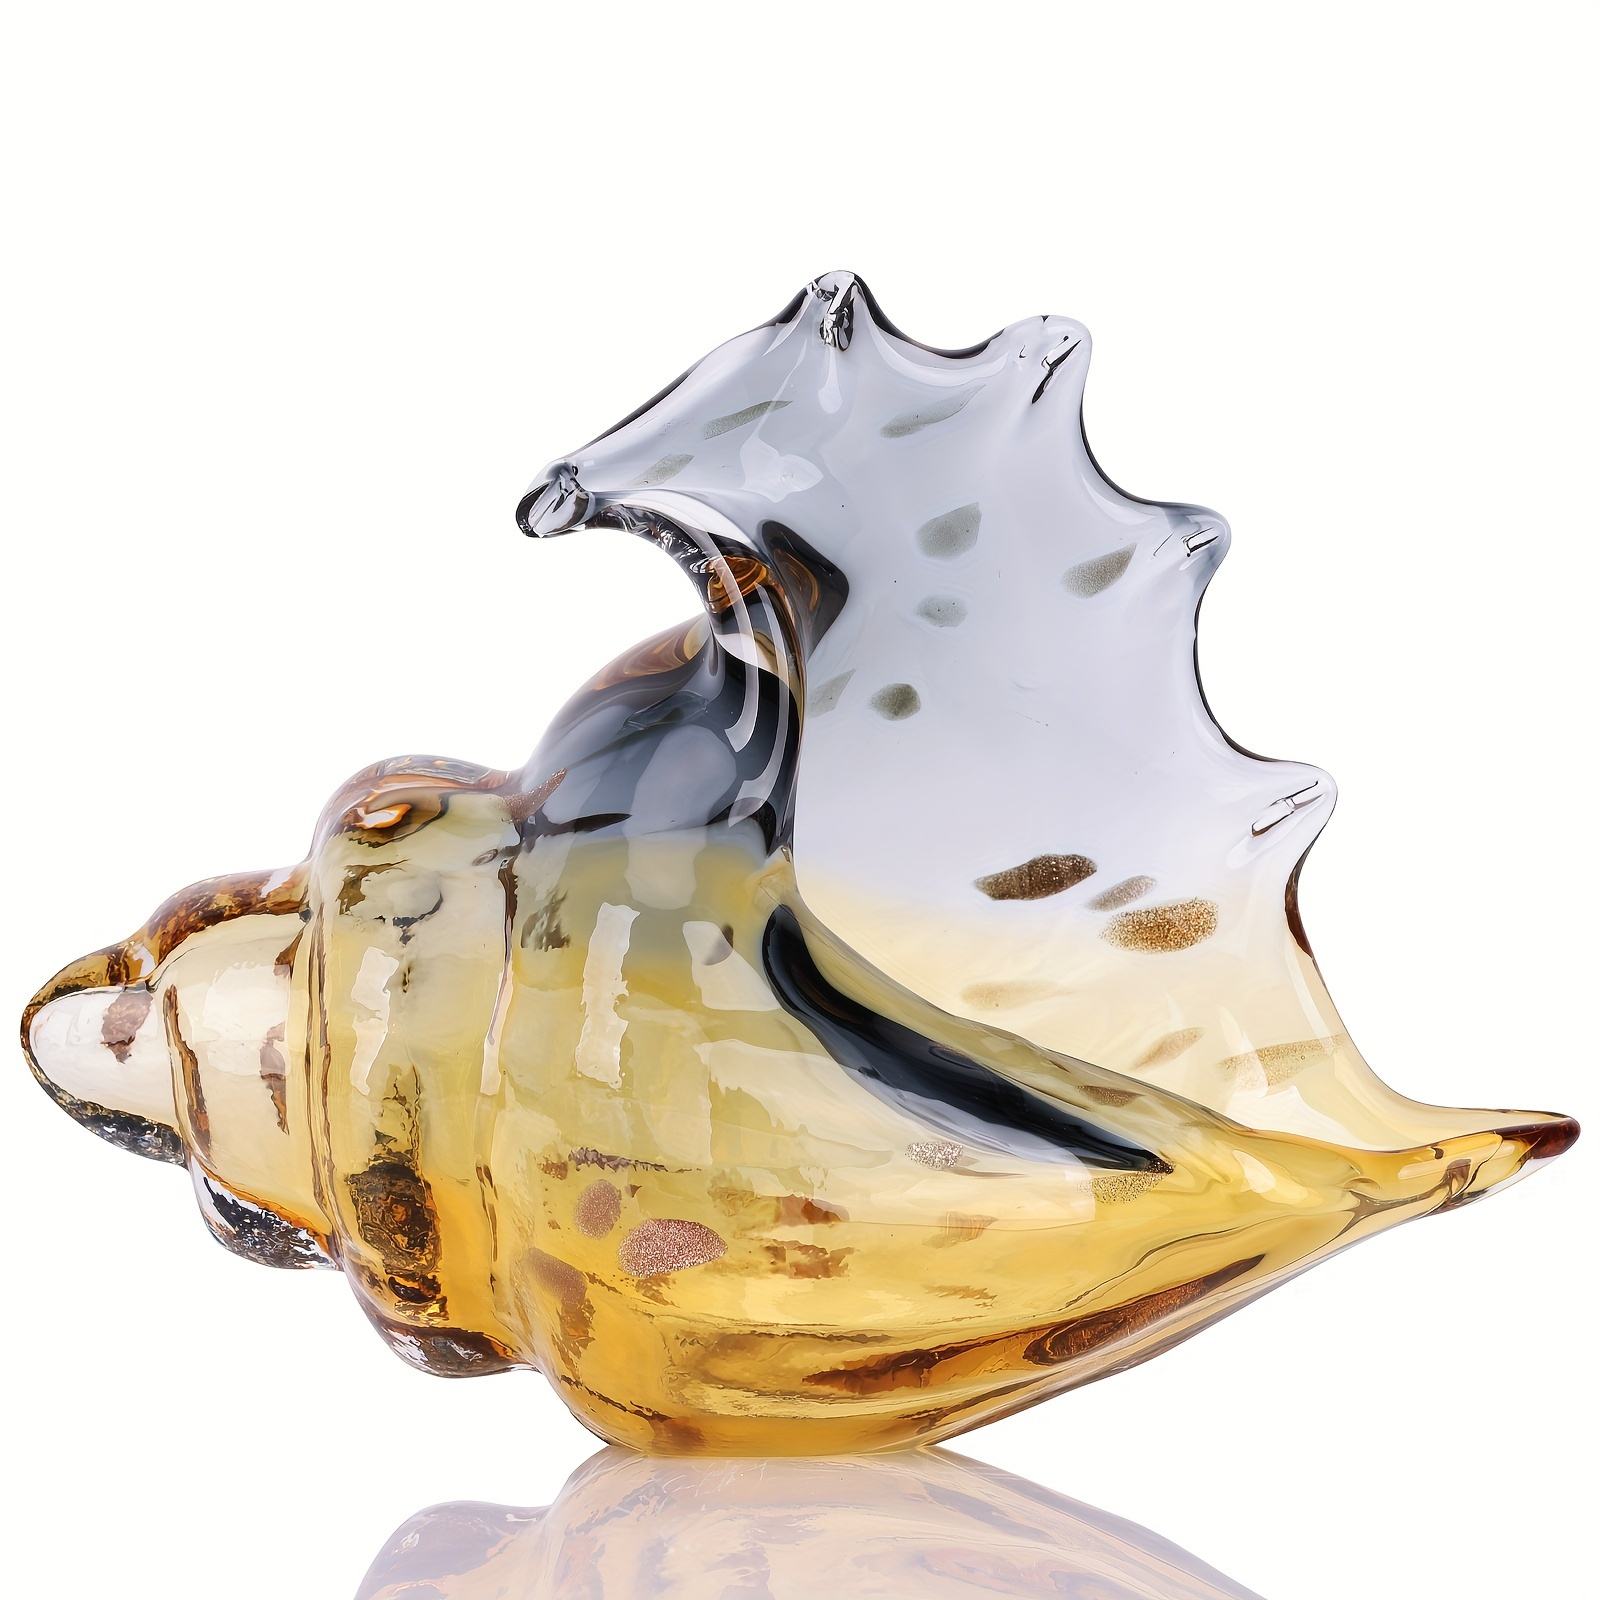 

1pc, Hand Blown Glass Conch Statue, Artistic Glass Shell Sculpture, Home Decor For Living Room Coffee Table, Room, Tv Cabinet, Entryway Table Decor